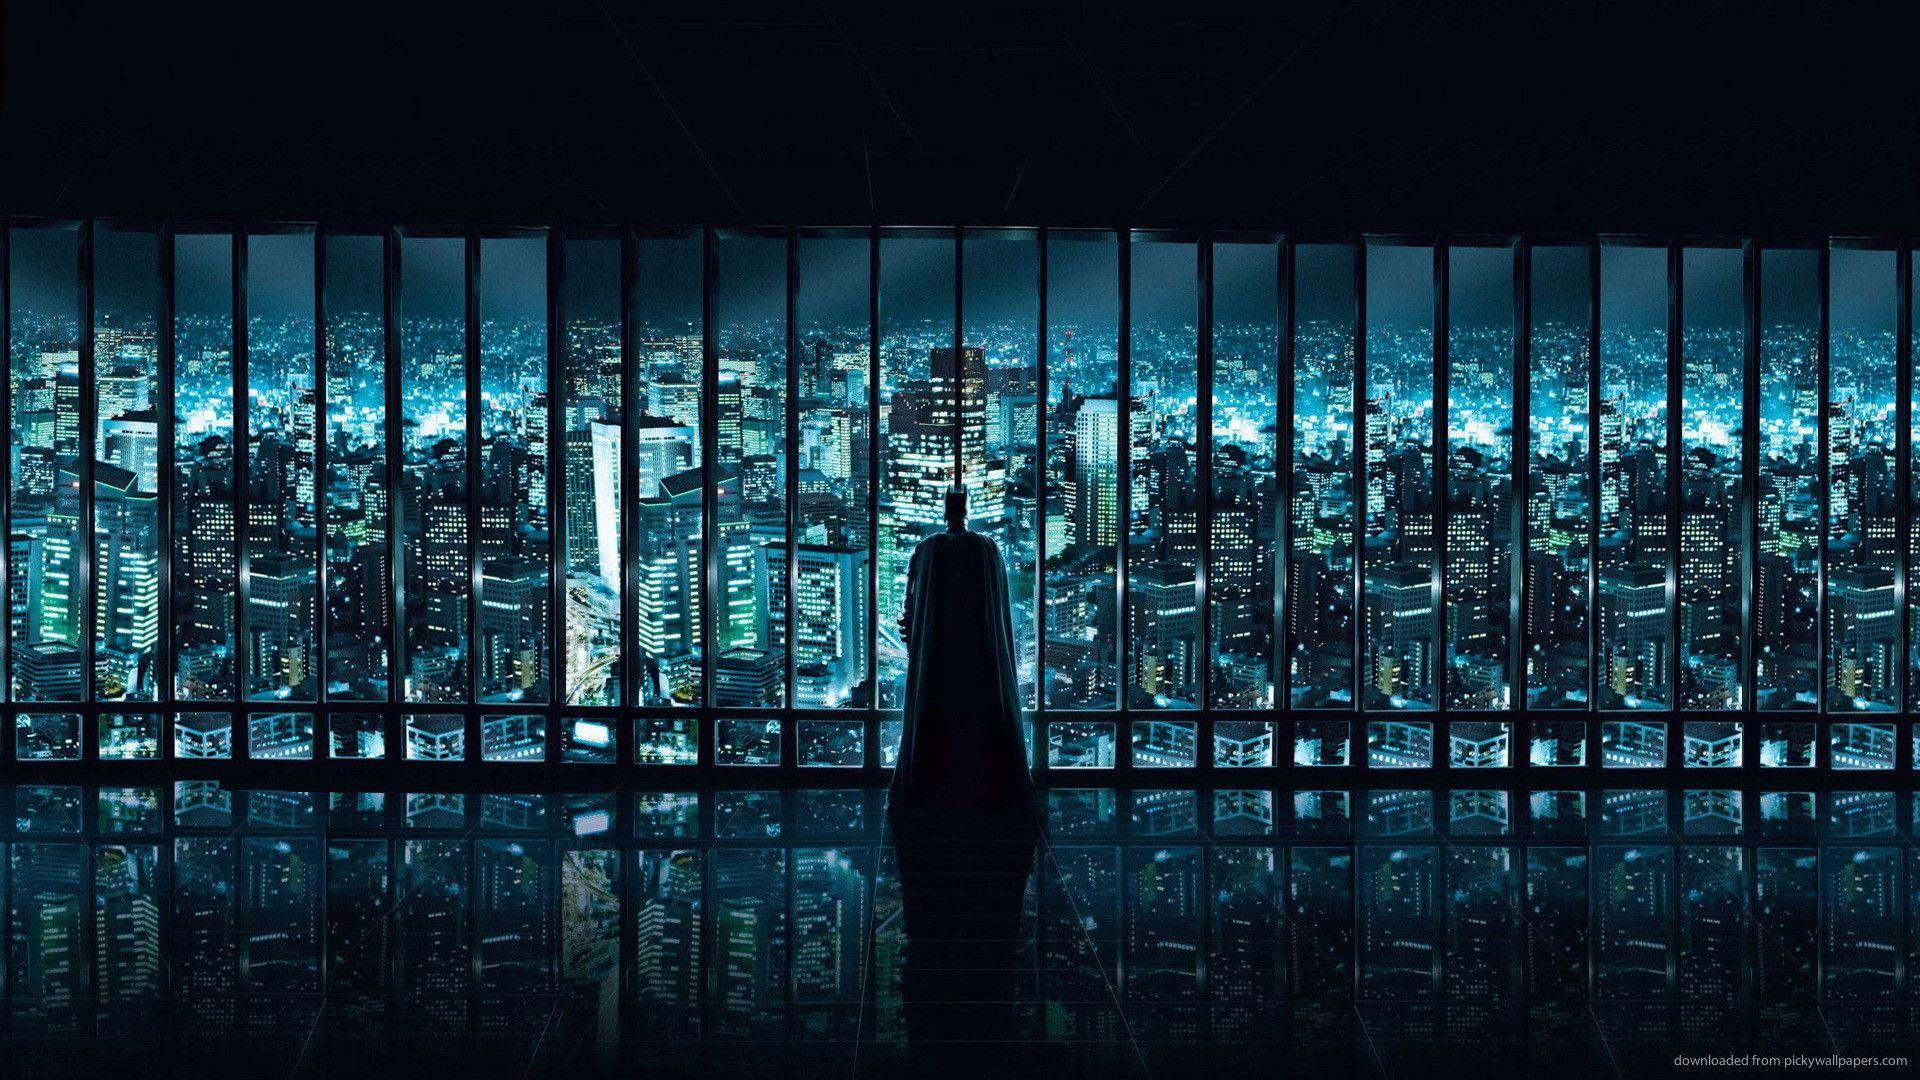 Exciting Batman Epic Glass Wall Wallpaper 1920x1080PX Epic